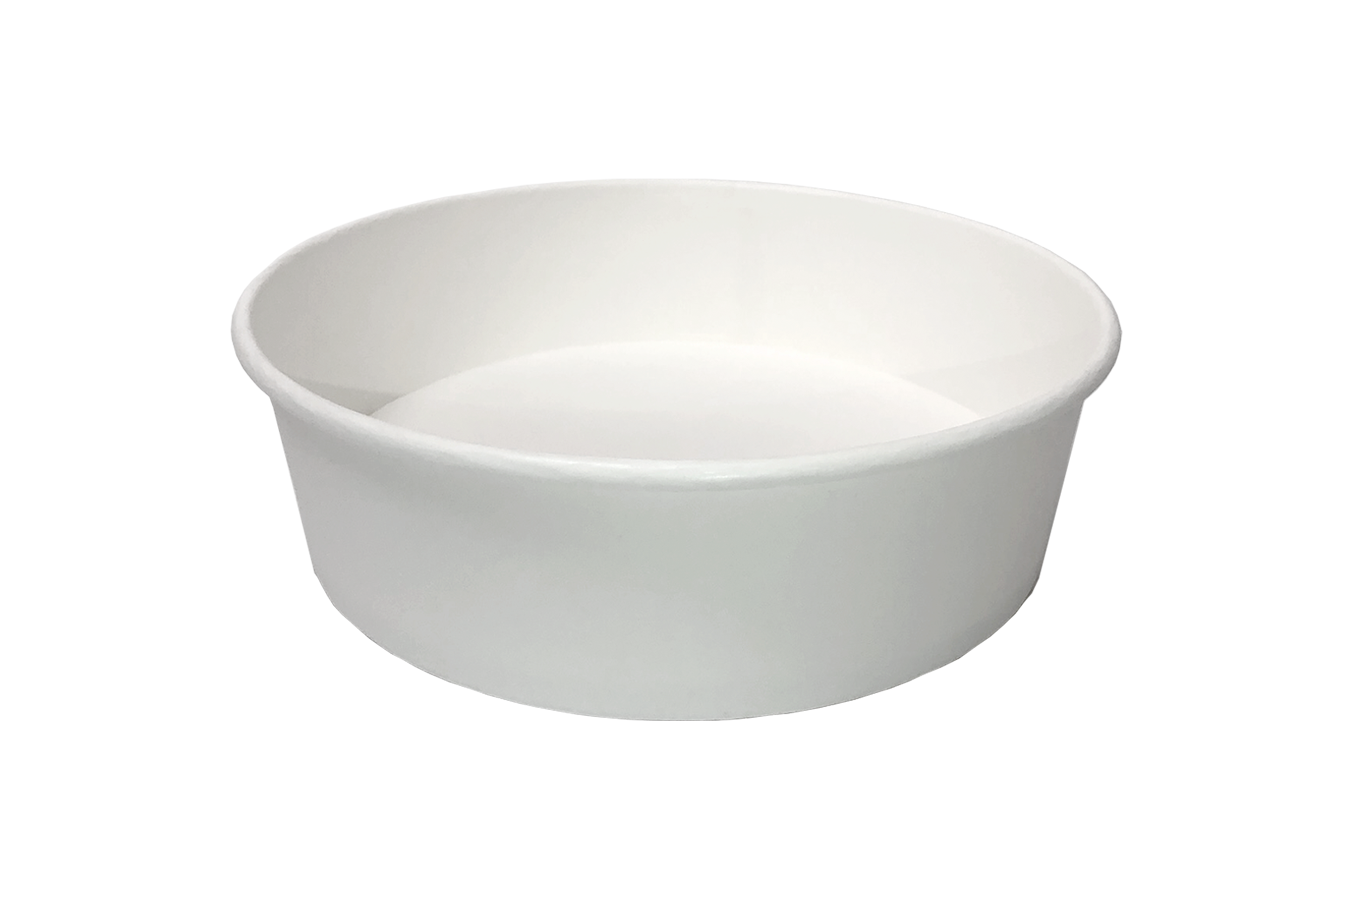 Premium takeout container white color 32 oz size Athena paper bowl by Ecoapx Inc